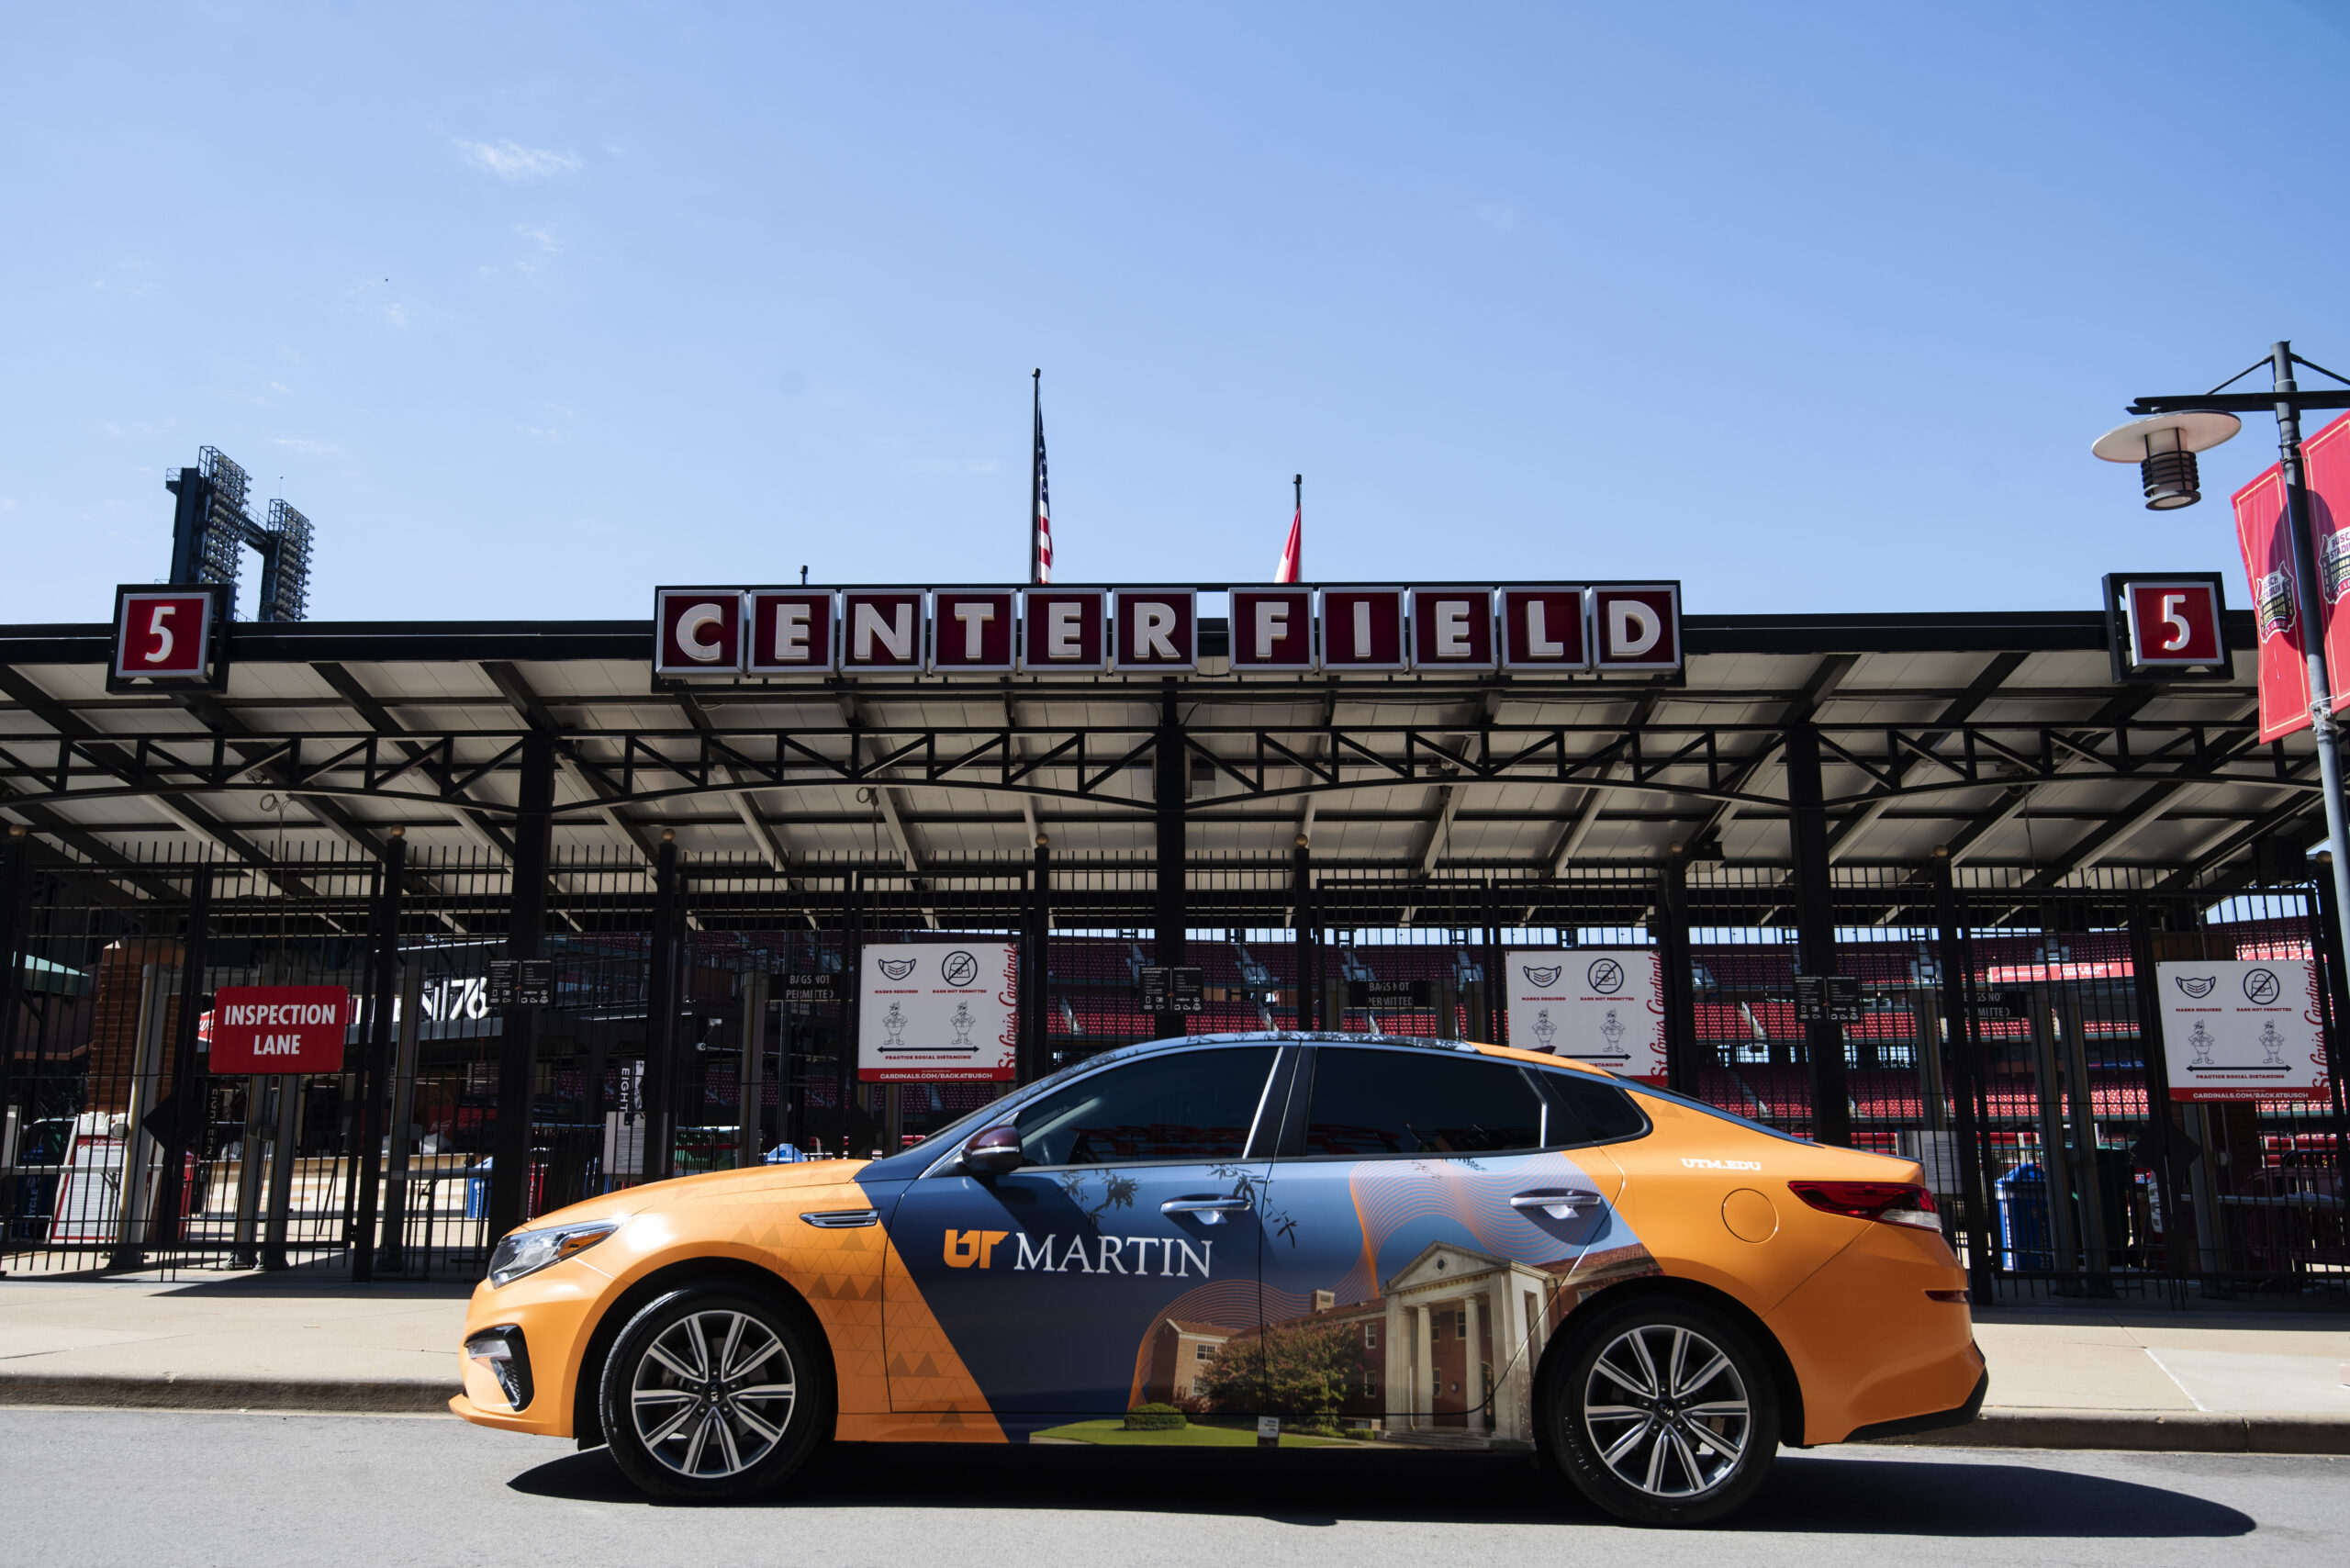 Photos of a Nickelytics car wrapped for the University of Tennessee at Martin on May, 13, 2021 in Saint Louis, Missouri. 

©MartaPayne